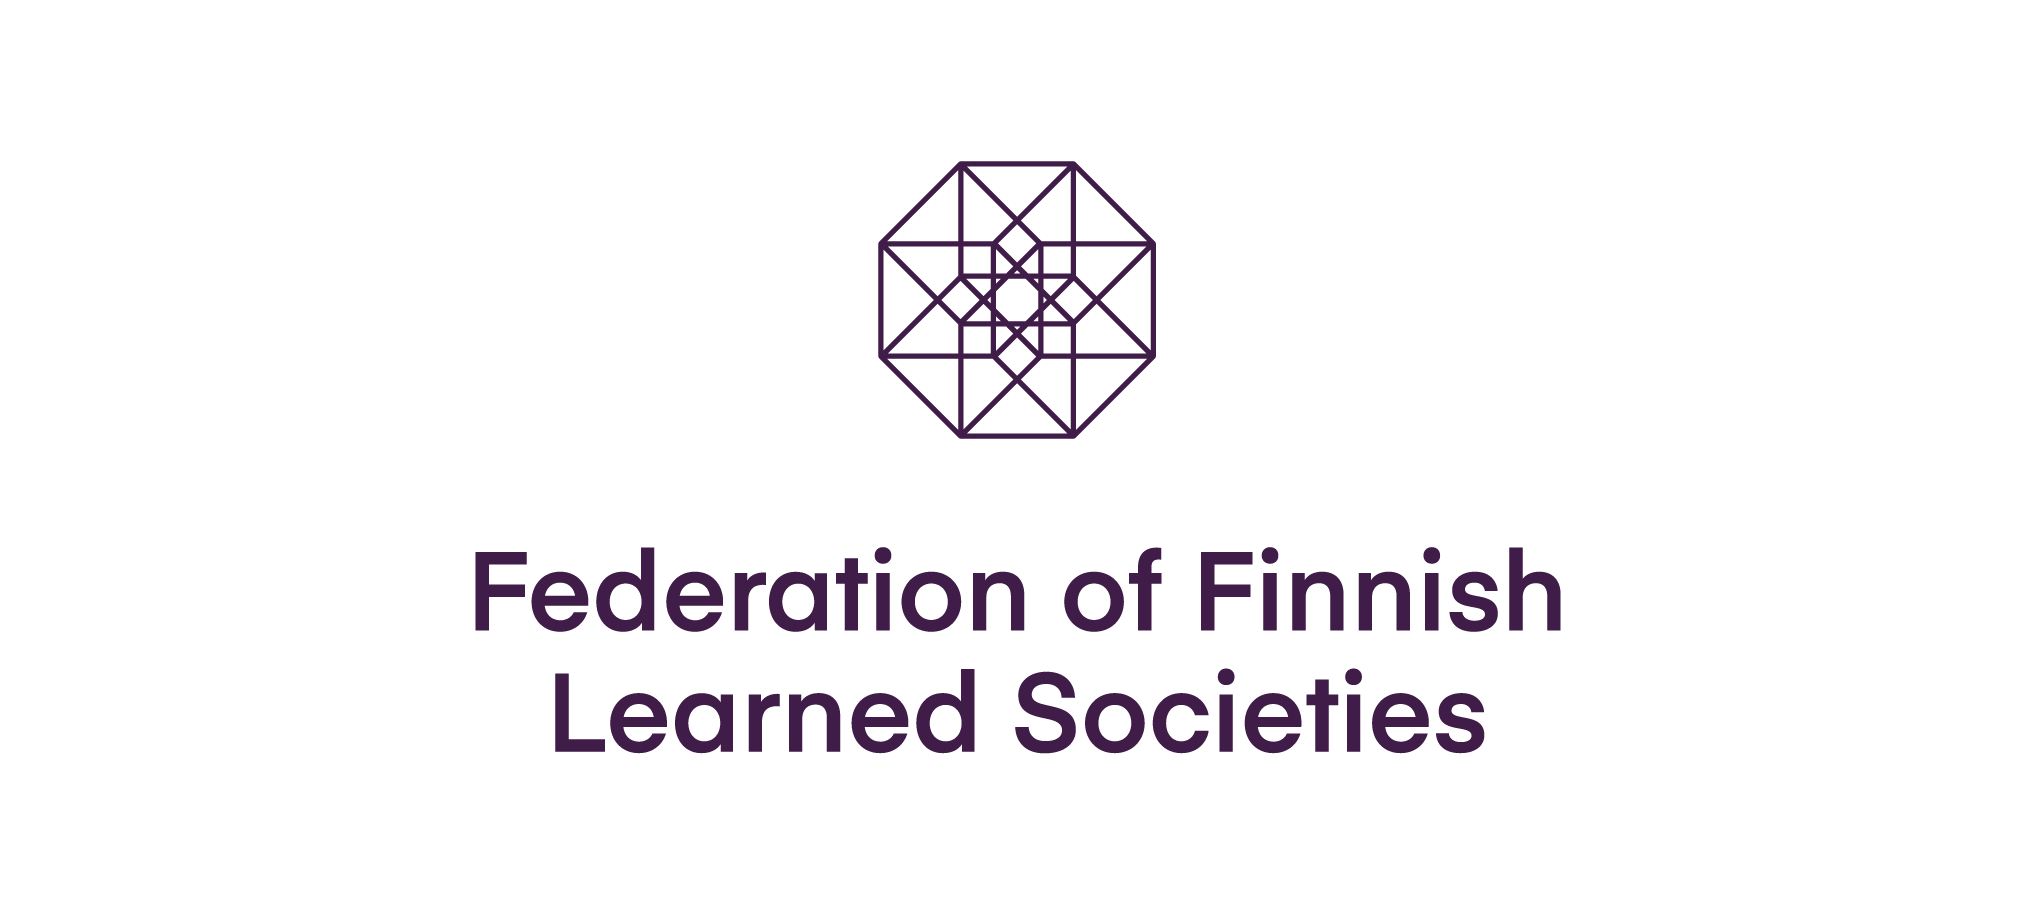 The Federation of Finnish Learned Societies` logo